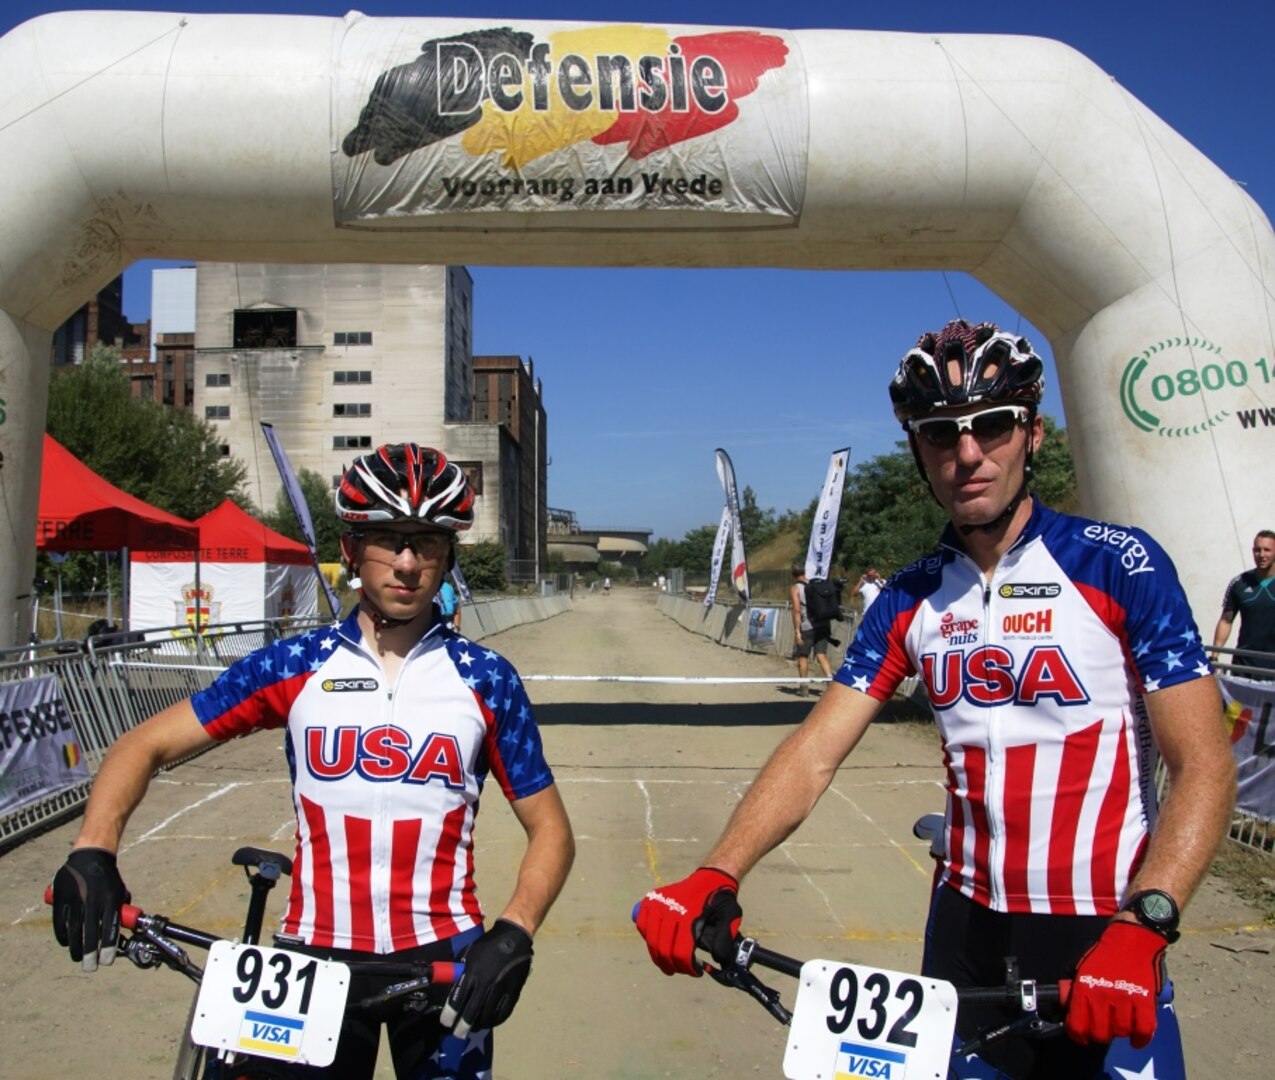 Left to Right:  SrA Dave Flaten (USAF) and AWSI Chuck Jenkins (Navy) take fifth place at the 1st ever Mountain Bike race of the 2013 CISM World Military Cycling Championship 2-6 September in Leopoldsburg, Belgium.  